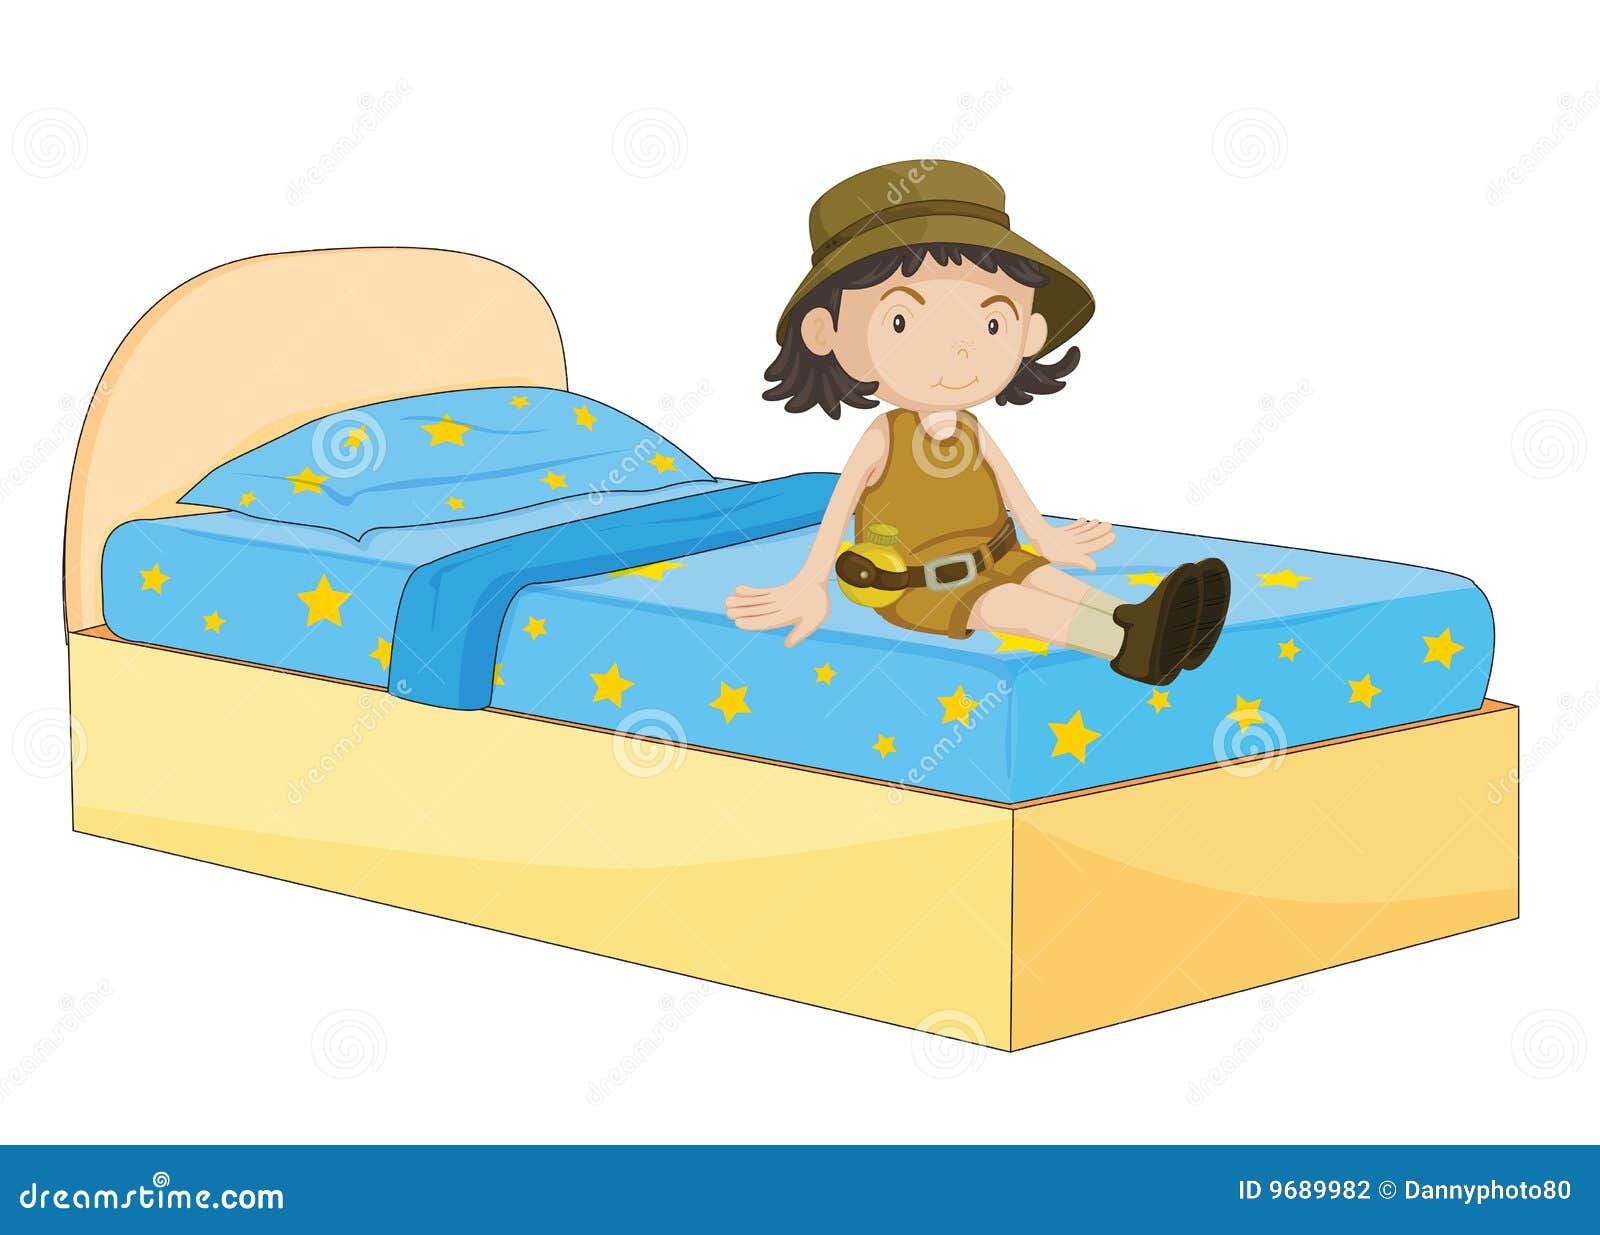 Girl Sitting On Bed Stock Photography - Image: 9689982